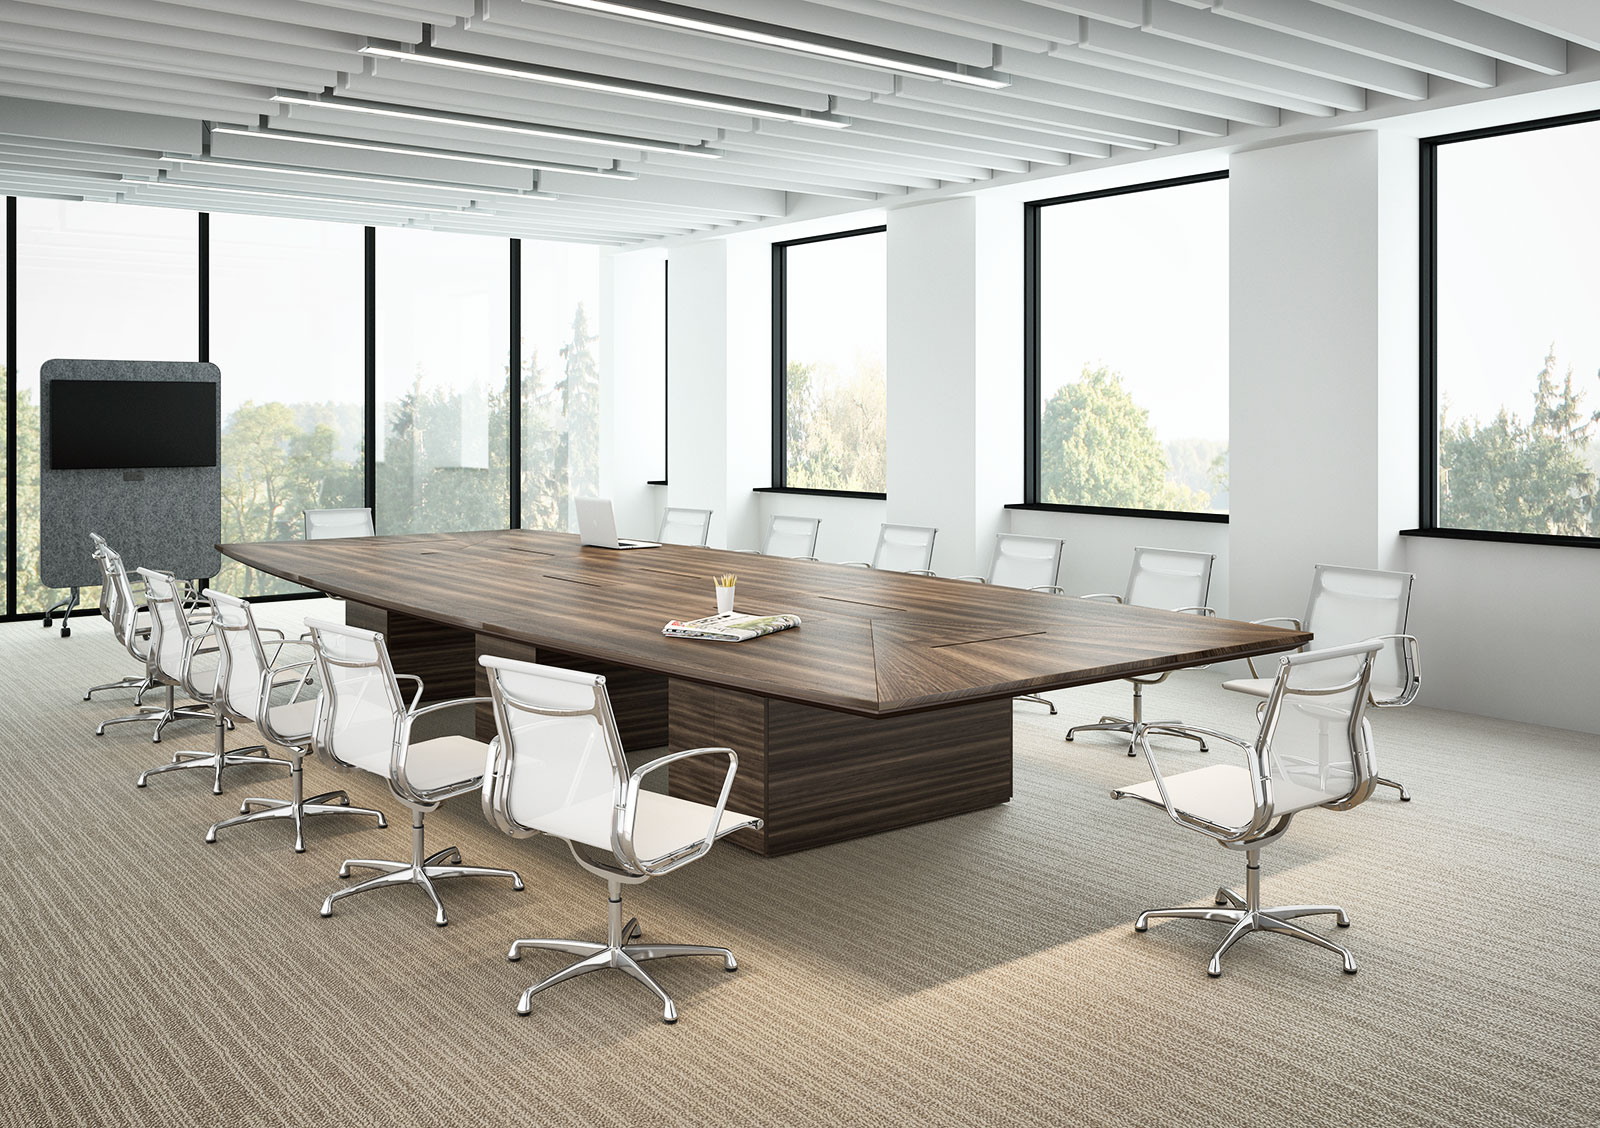 SUNBURST conference table with special veneer